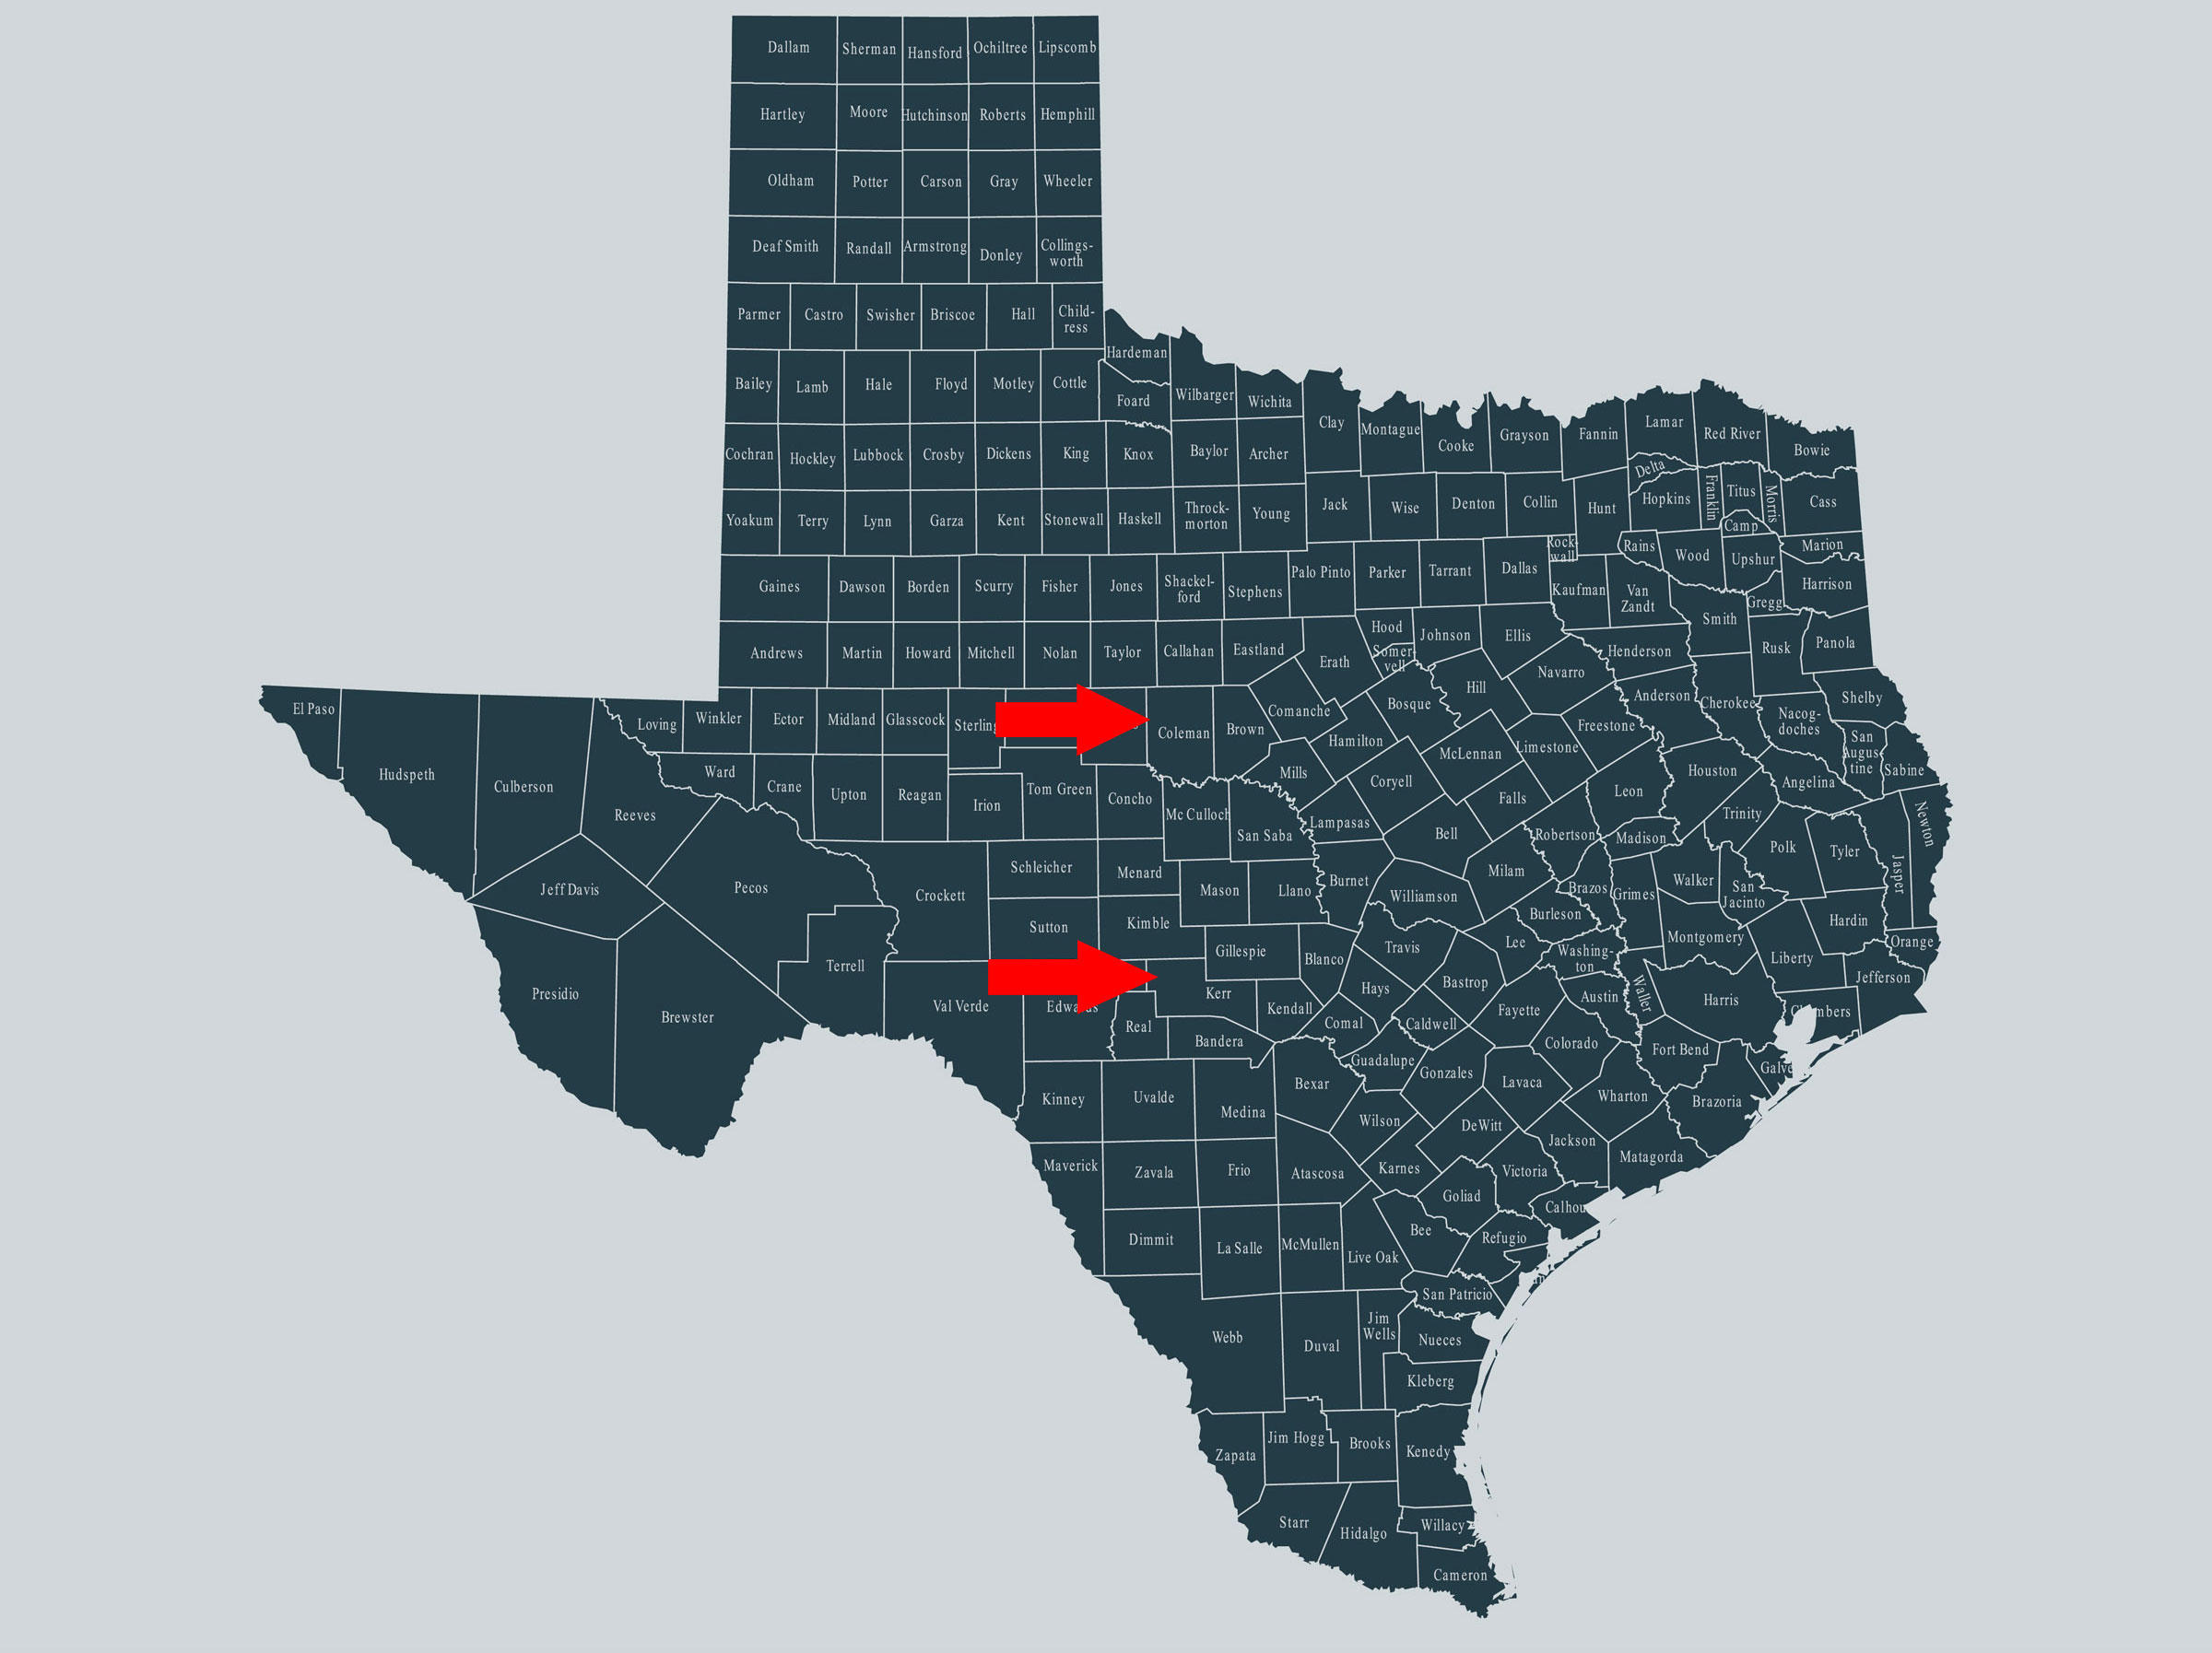 Texas Coleman and Kerr Counties map